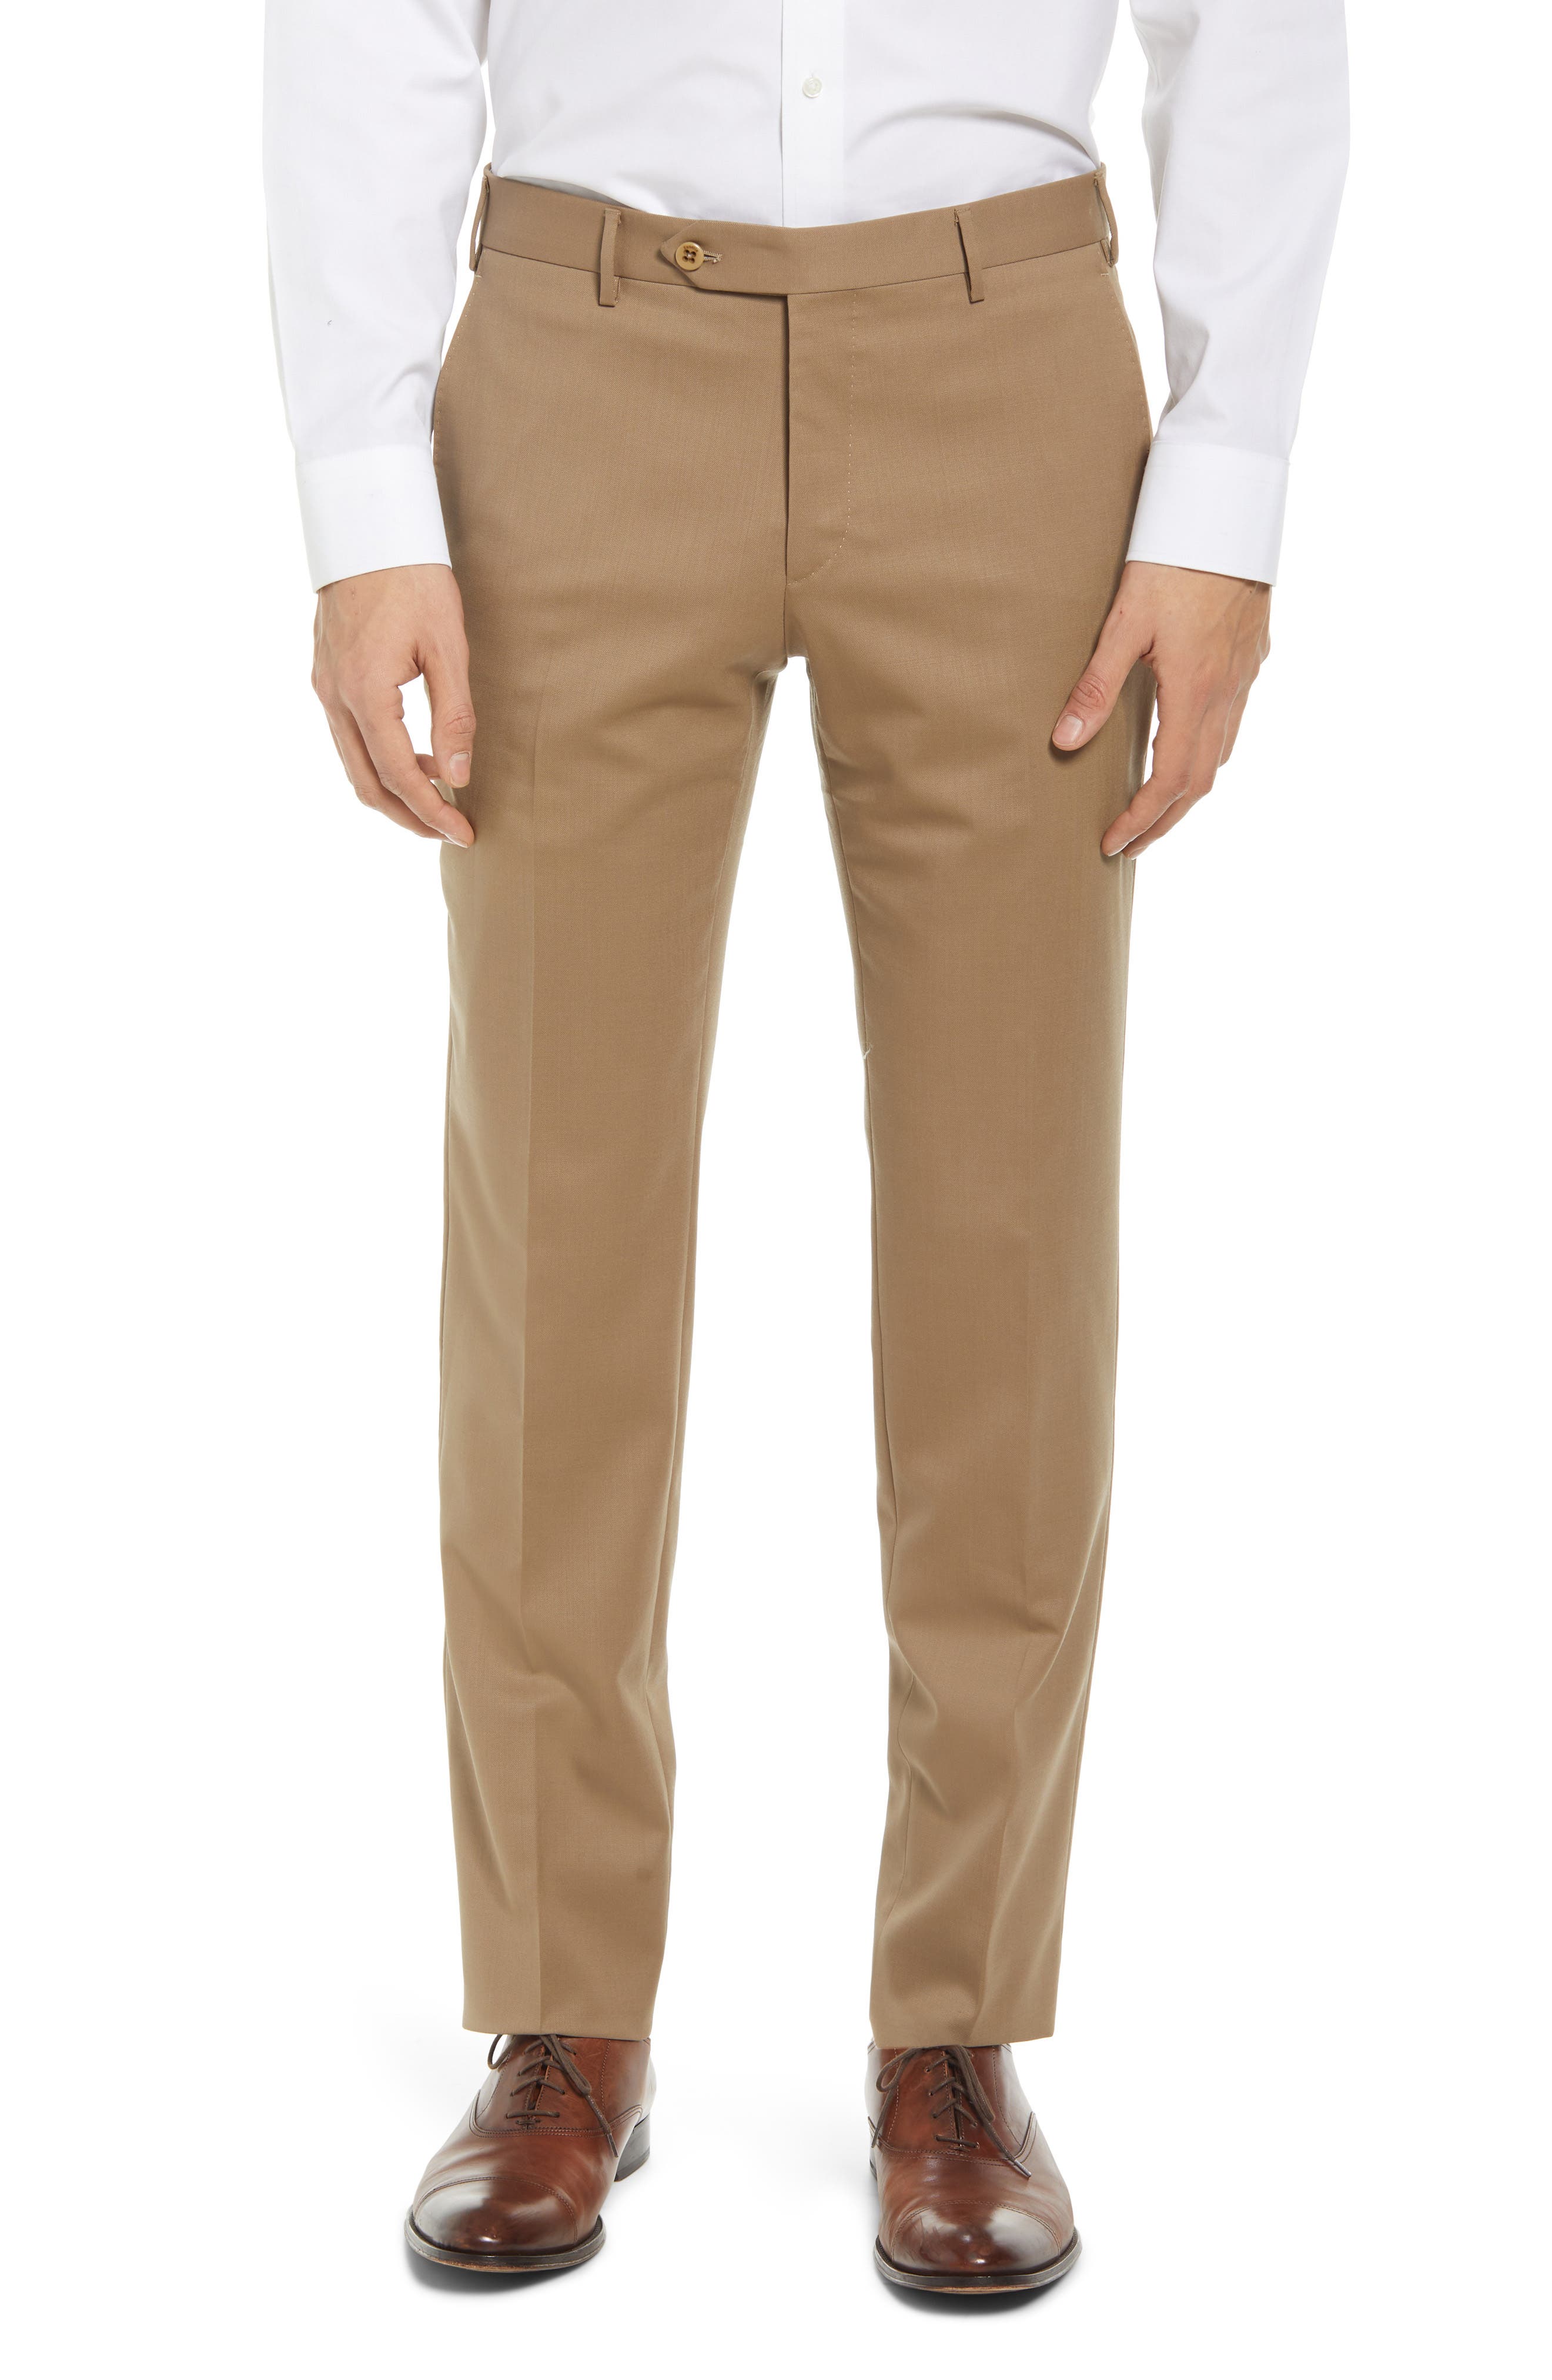 Zanella NWT Dress Pants Size 34 In Solid White 100% Linen Parker